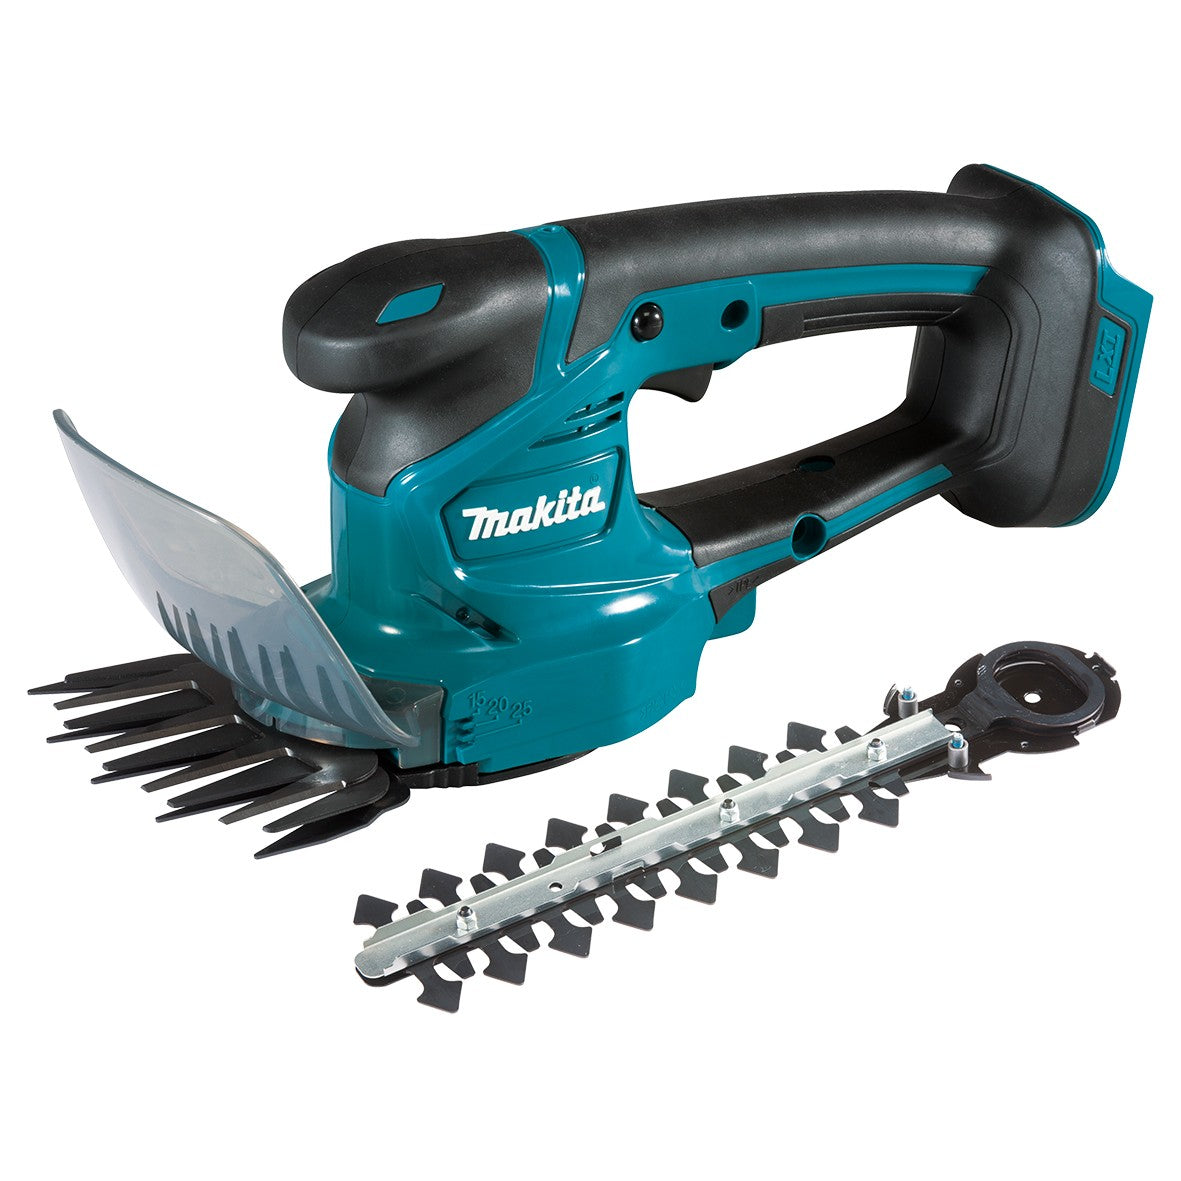 18V 110mm Grass Shear Bare (Tool Only) DUM111ZX by Makita